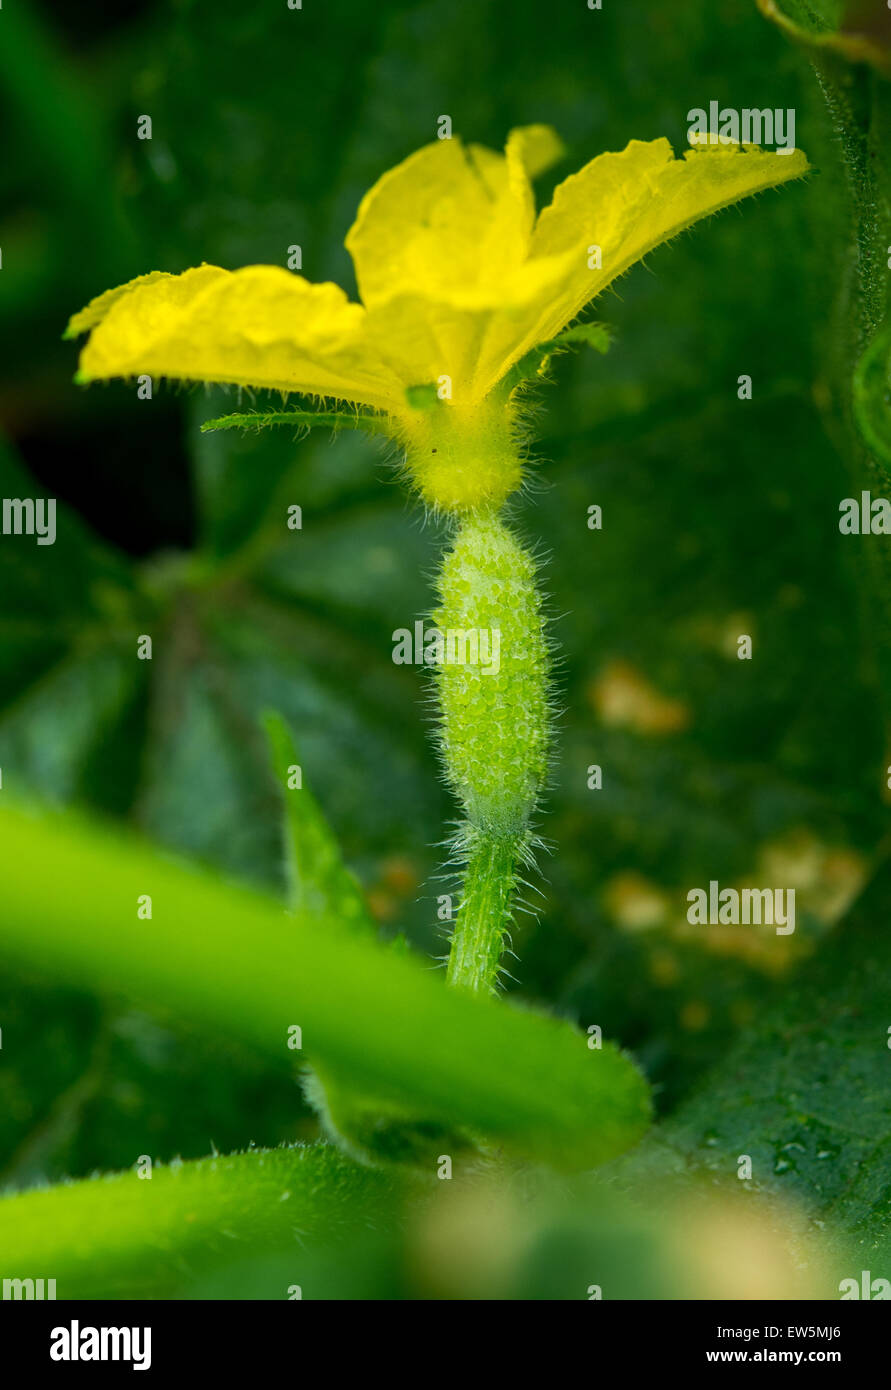 Duerrenhofe, Germany. 18th June, 2015. A small, young cucumber can be seen on a plant at the official start of the Spreewald cucumber harvest in Duerrenhofe, Germany, 18 June 2015. The harvest of the region's best-known product began on 18 June 2015. Phot Stock Photo